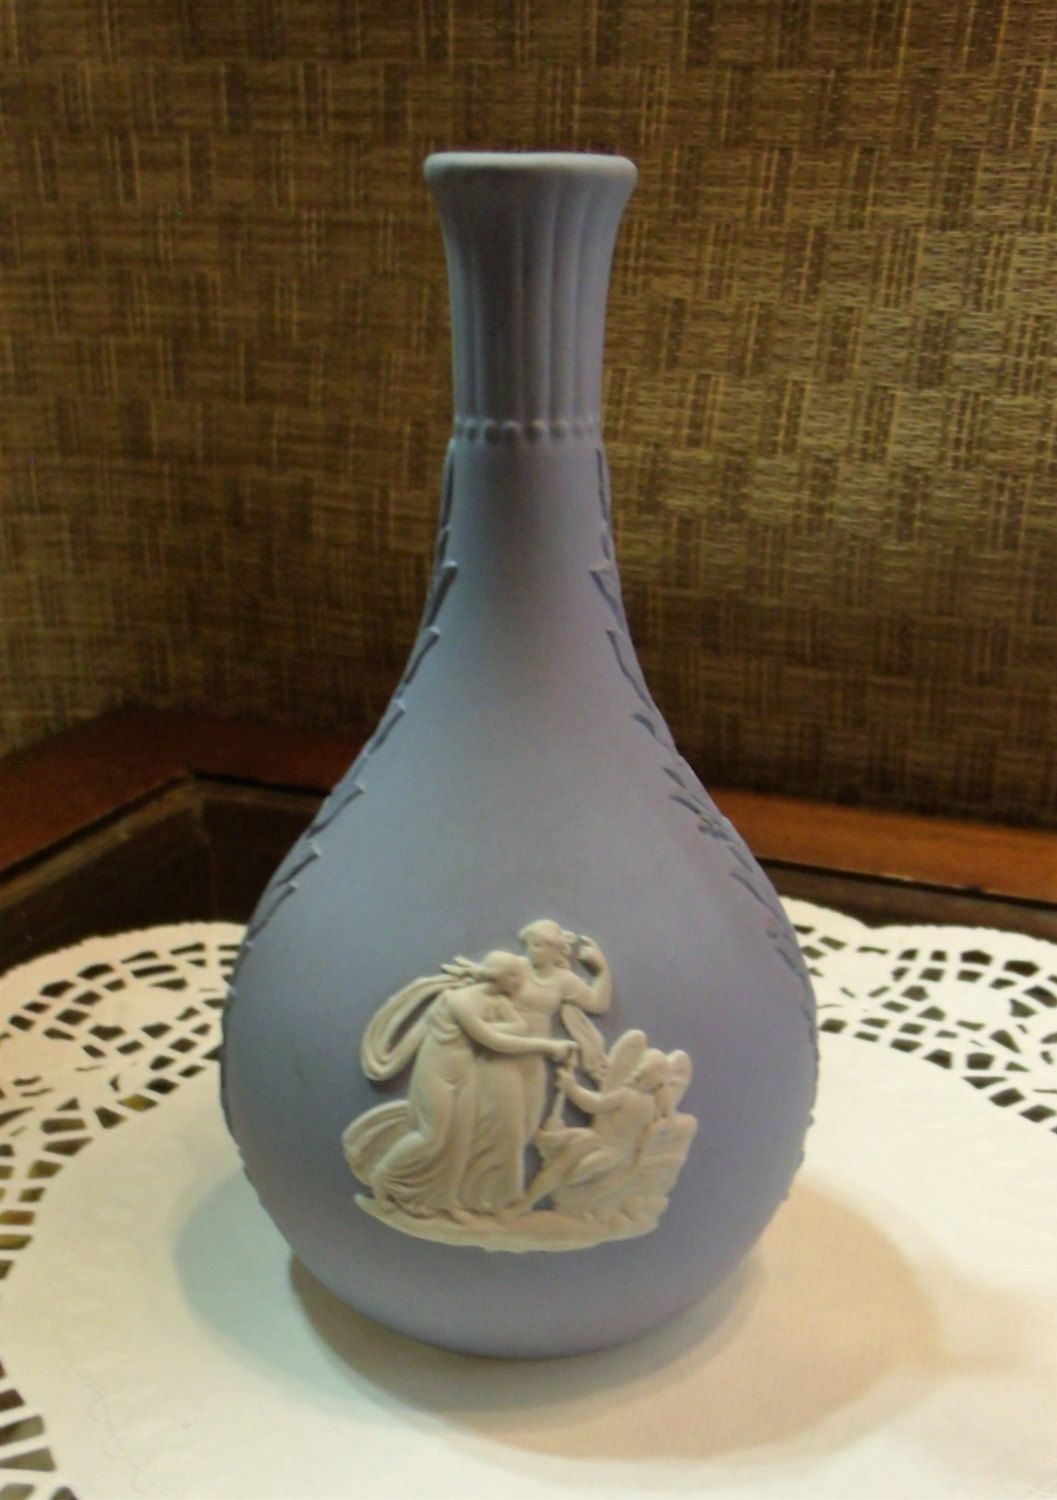 19 Fabulous Wedgwood Bud Vase 2023 free download wedgwood bud vase of blue bud vase wedgwood jasperware w pegasus white and blue small pertaining to blue bud vase wedgwood jasperware w pegasus white and blue small bud vase 5 1 2 with angel